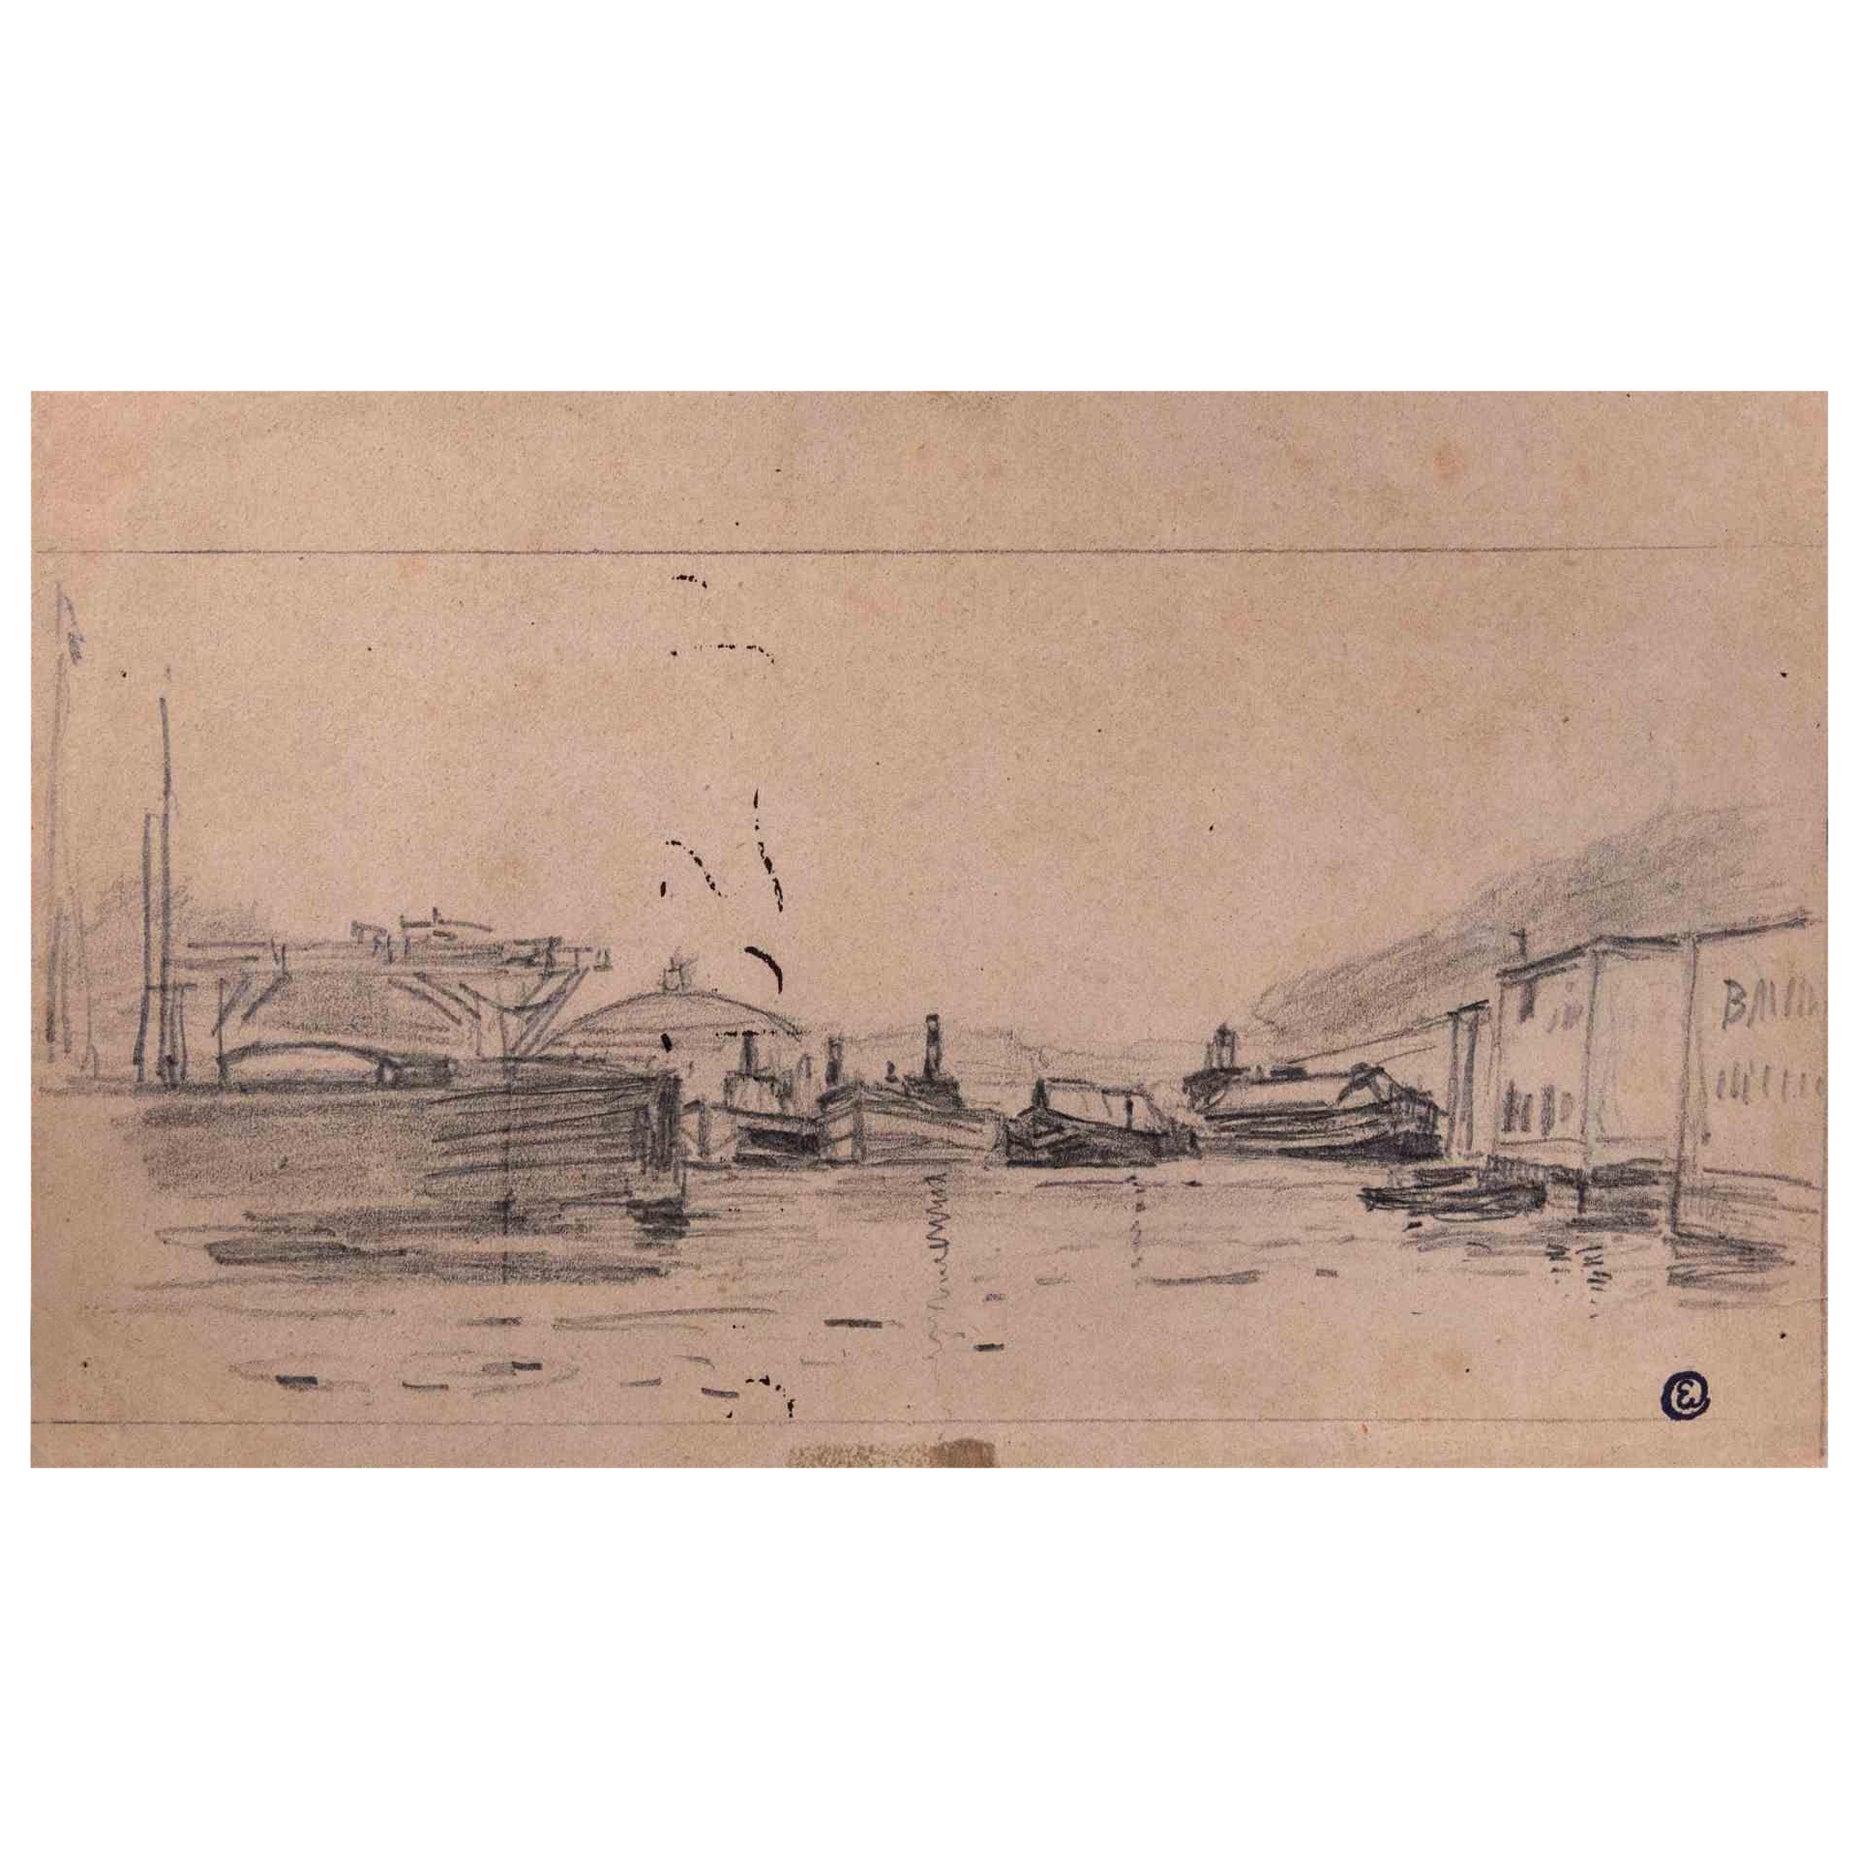 The Port is an original drawing in pencil realized in the early 20th Century by Edmond Cuisinier (1857-1917).

Monogrammed on the lower.

Good conditions.

The artwork is depicted through deft strokes poetically.
